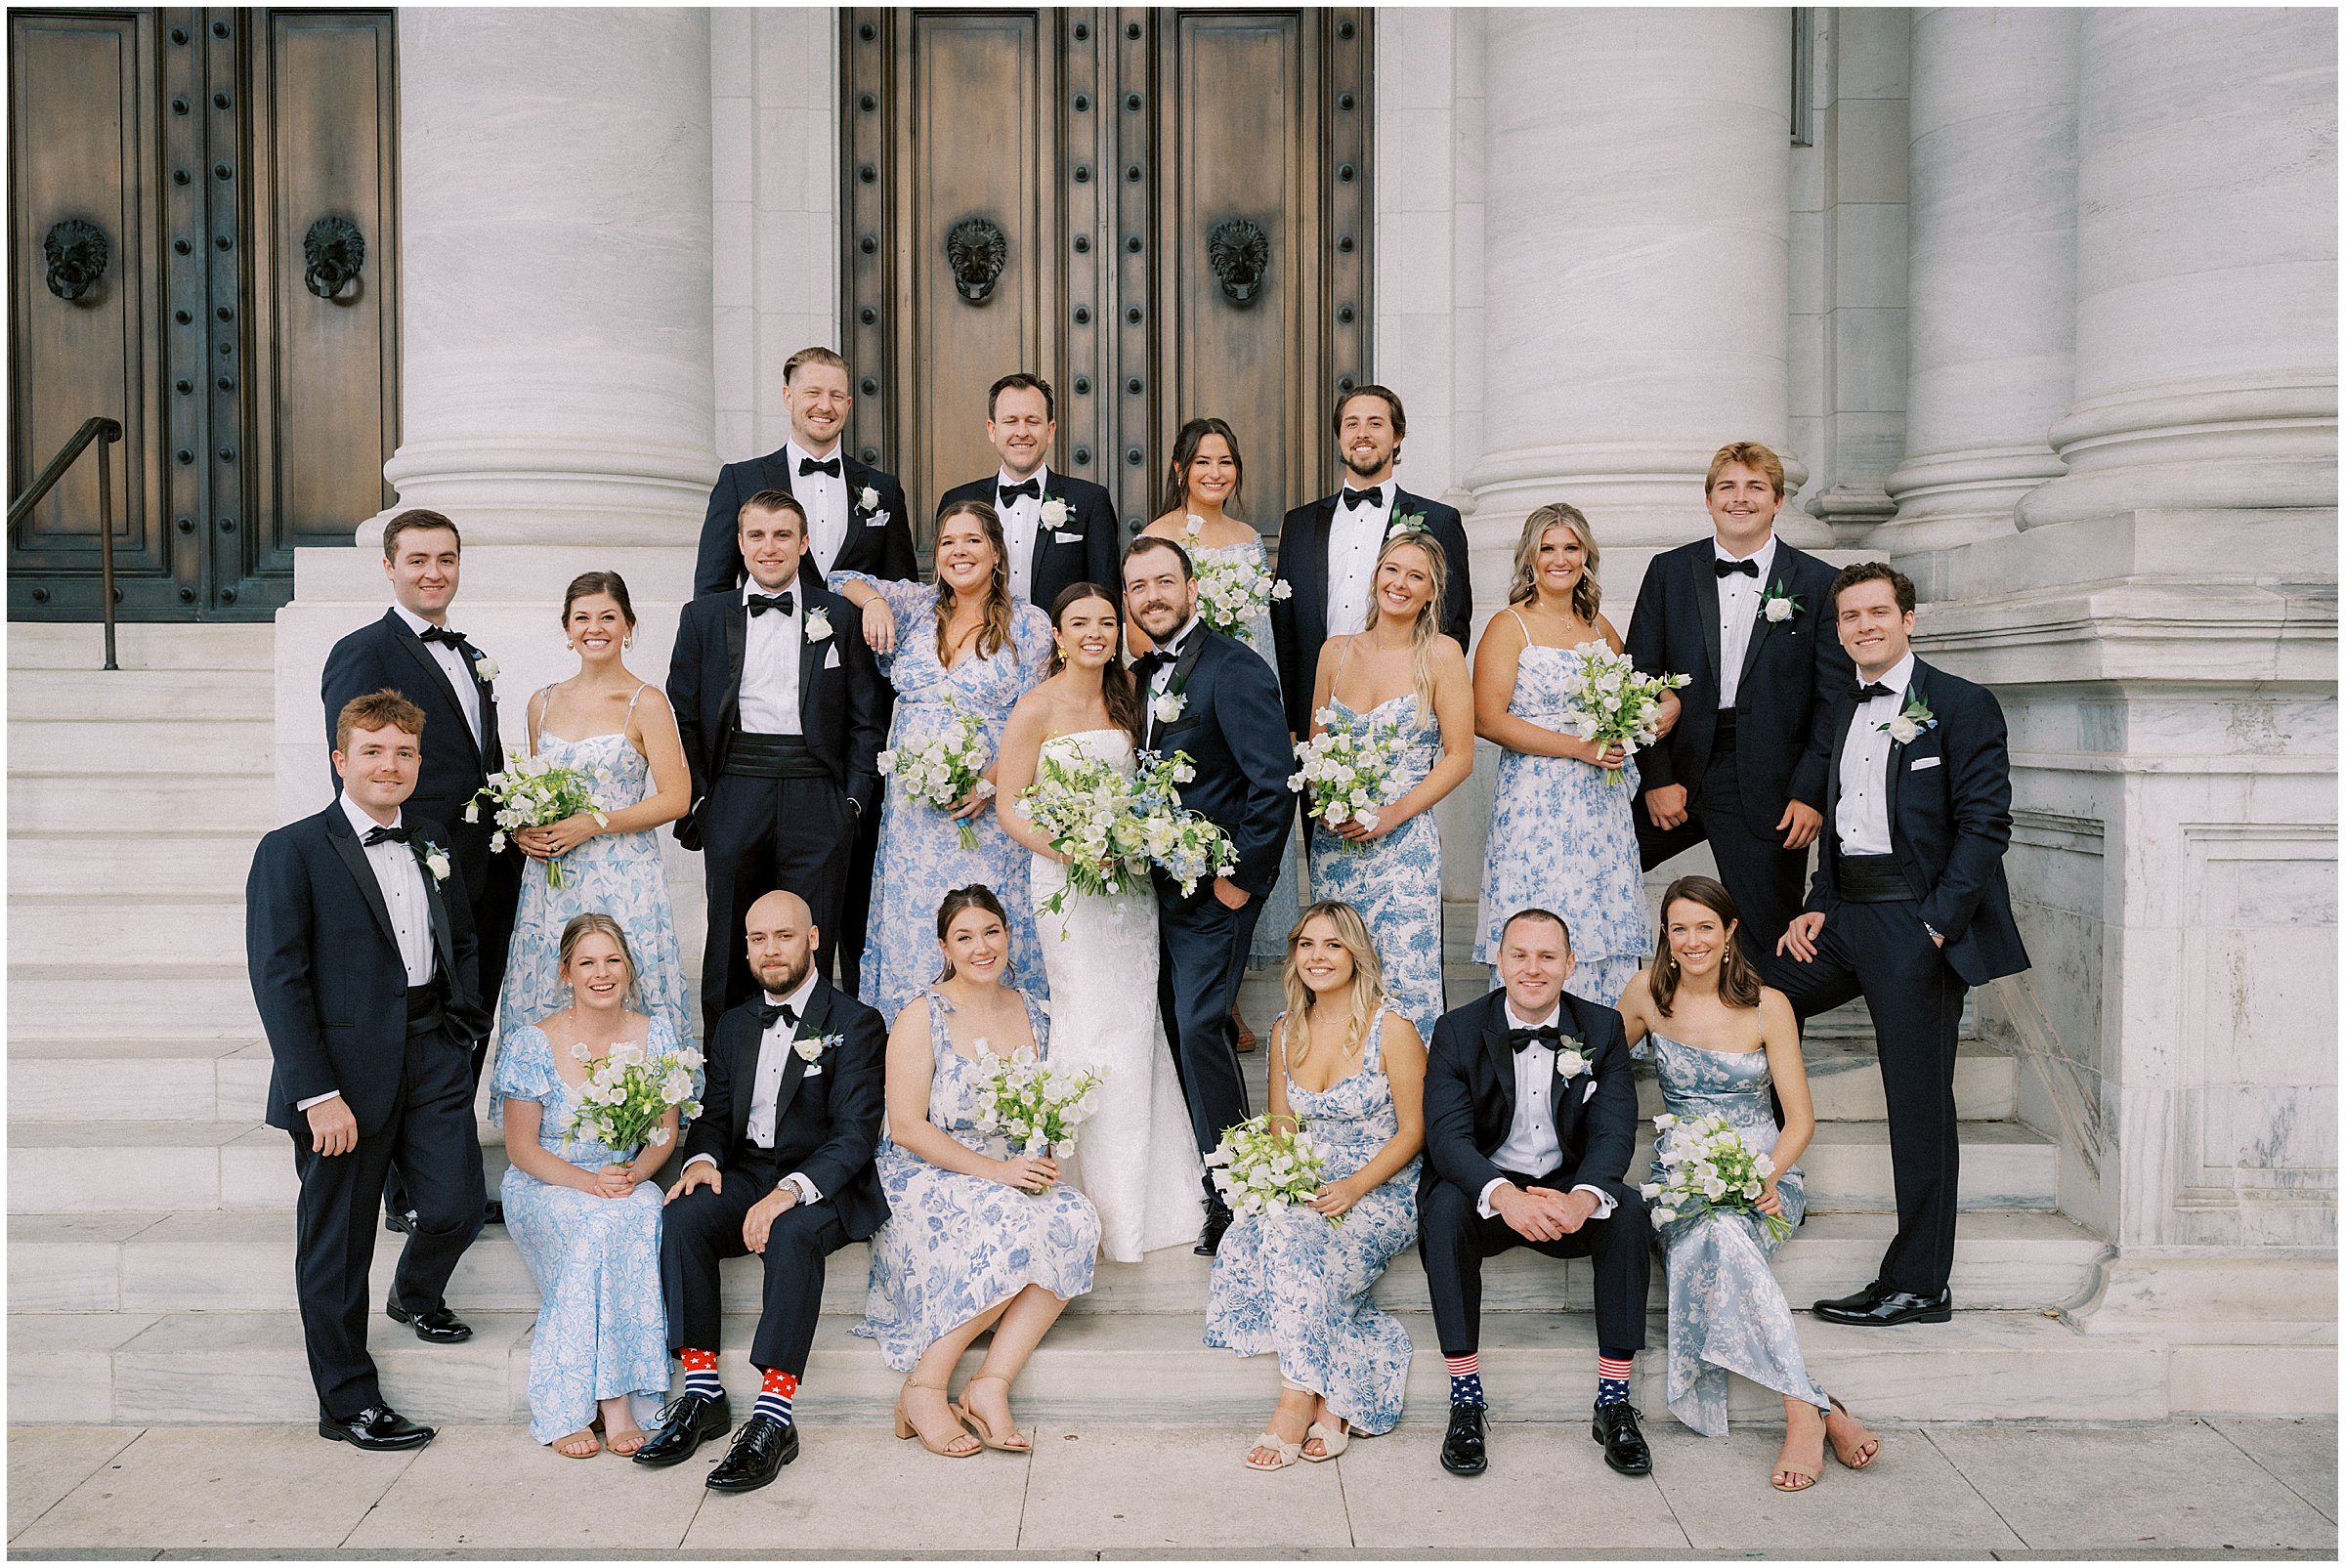 Wedding party portraits at DAR Constitution Hall in Washington, DC